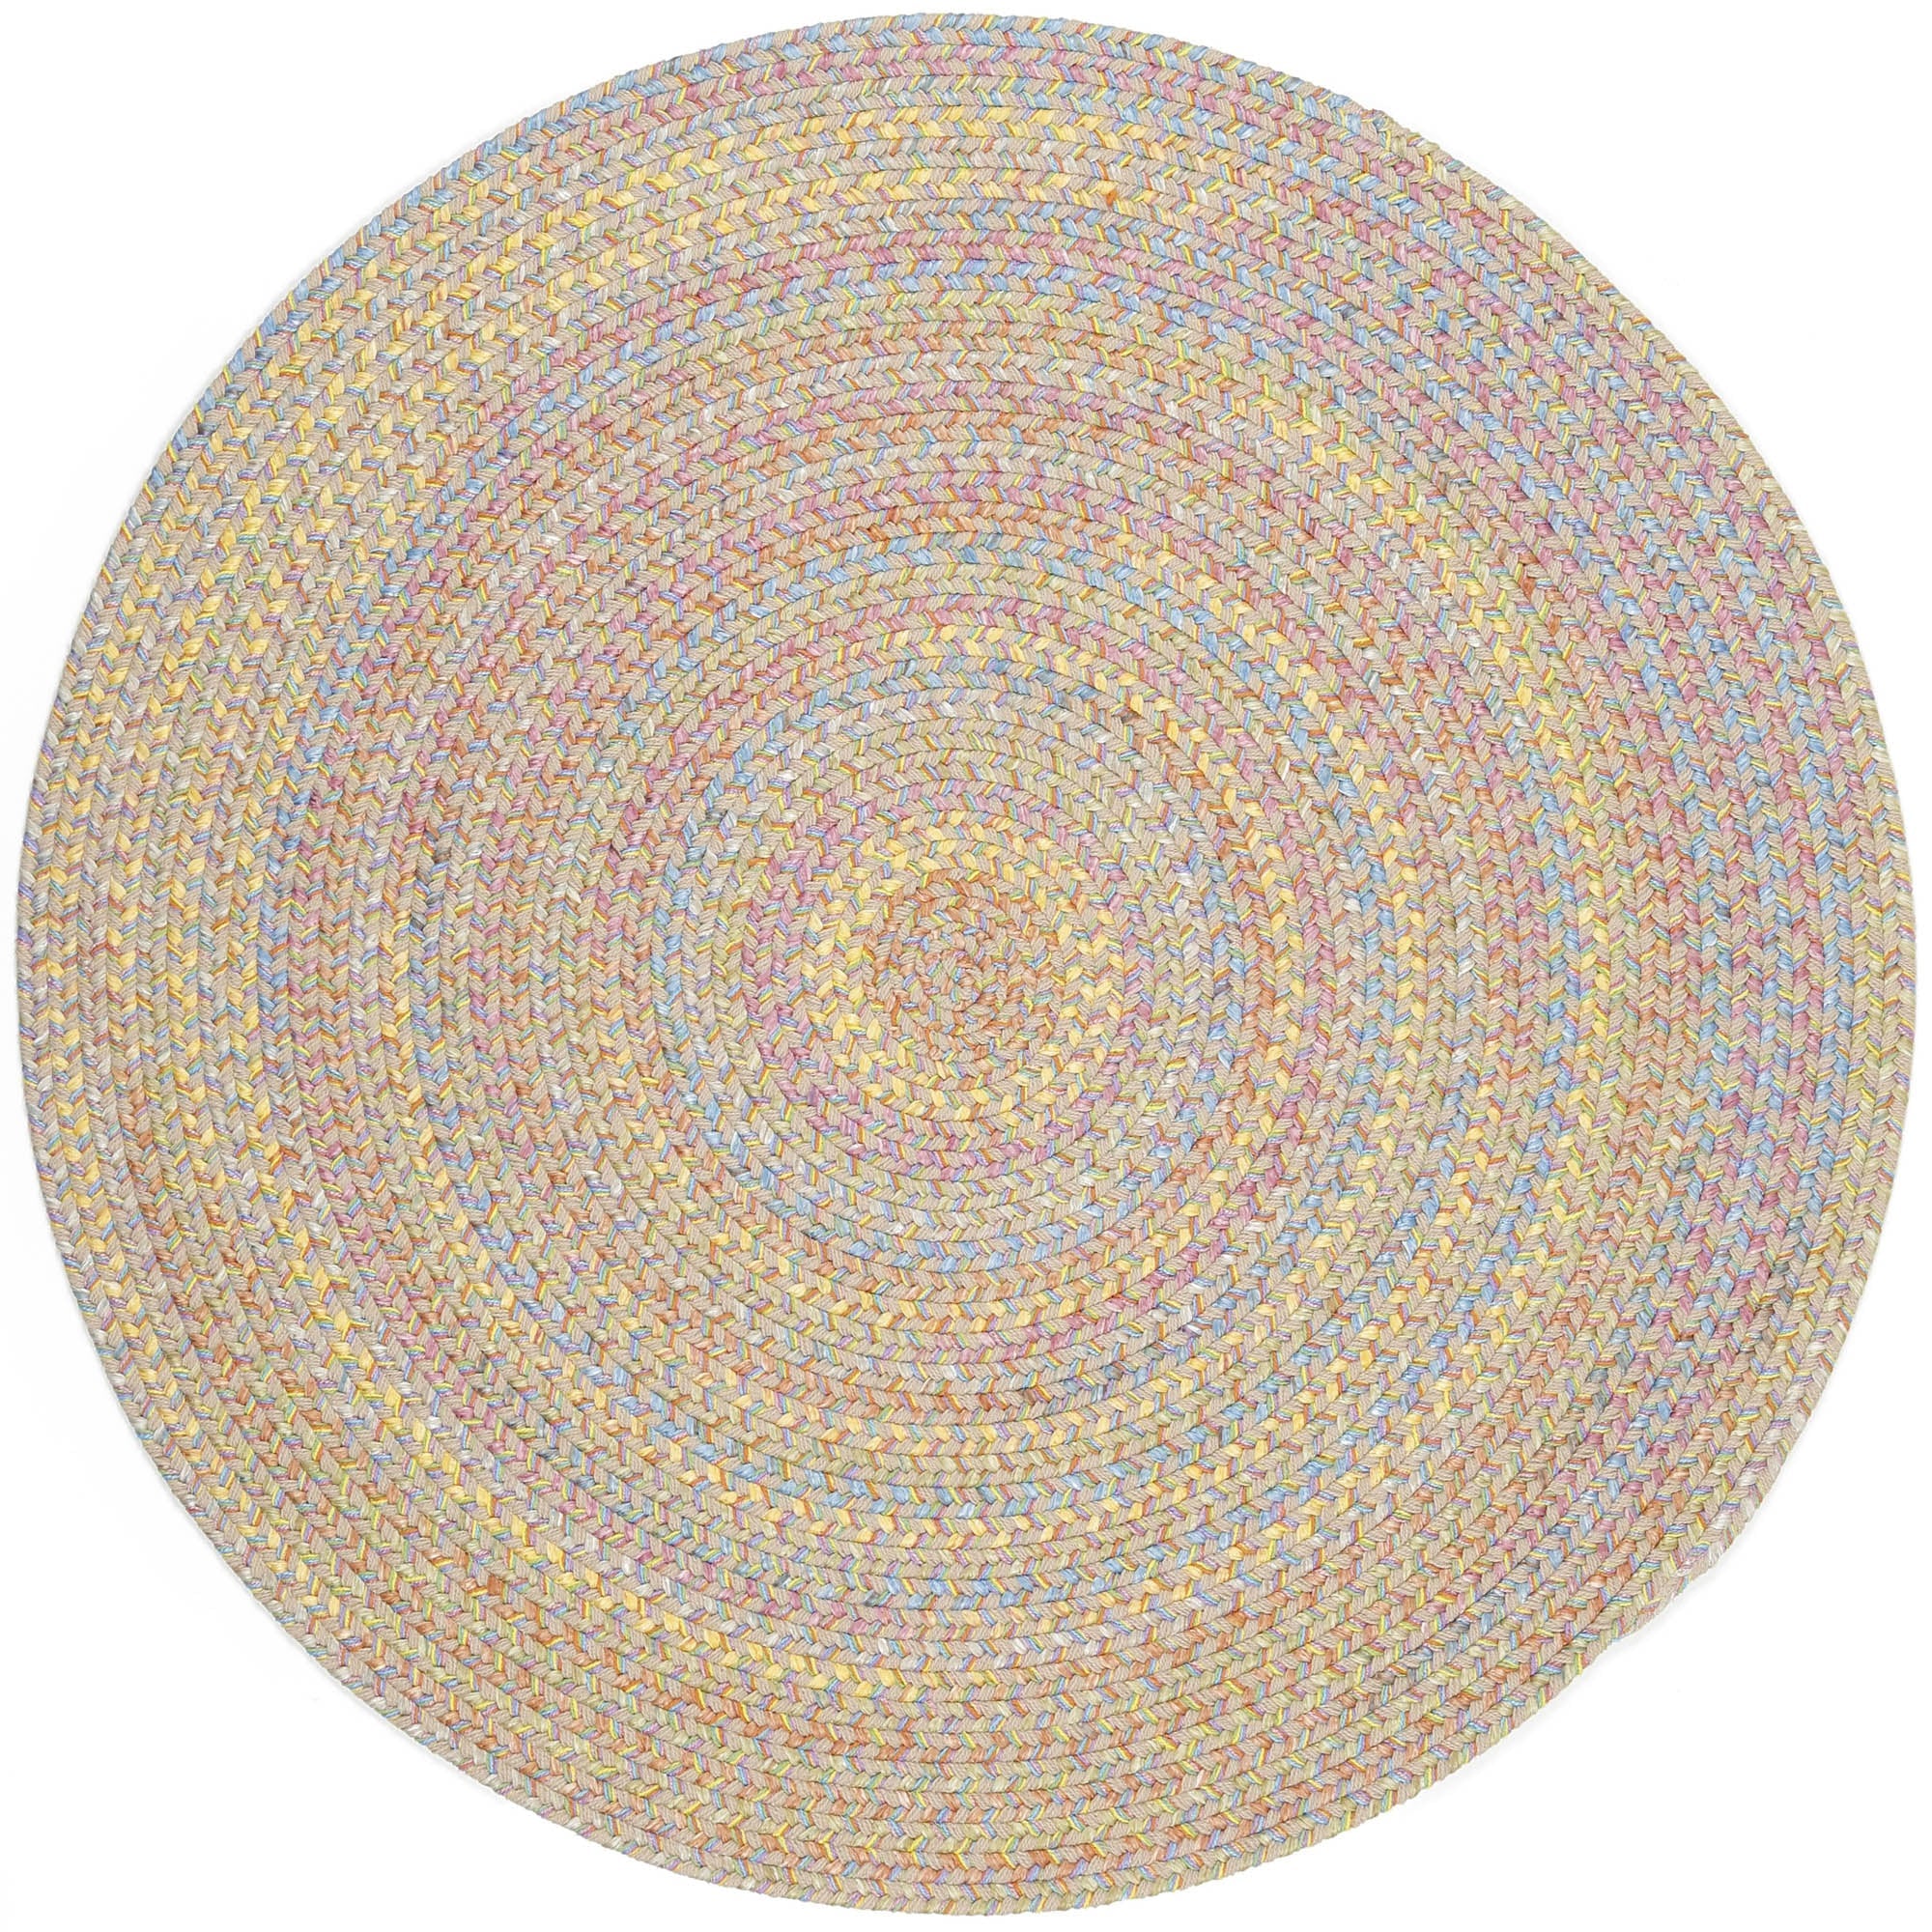 Hipster Kids and Playroom Braided Rug #color_sand beige multi